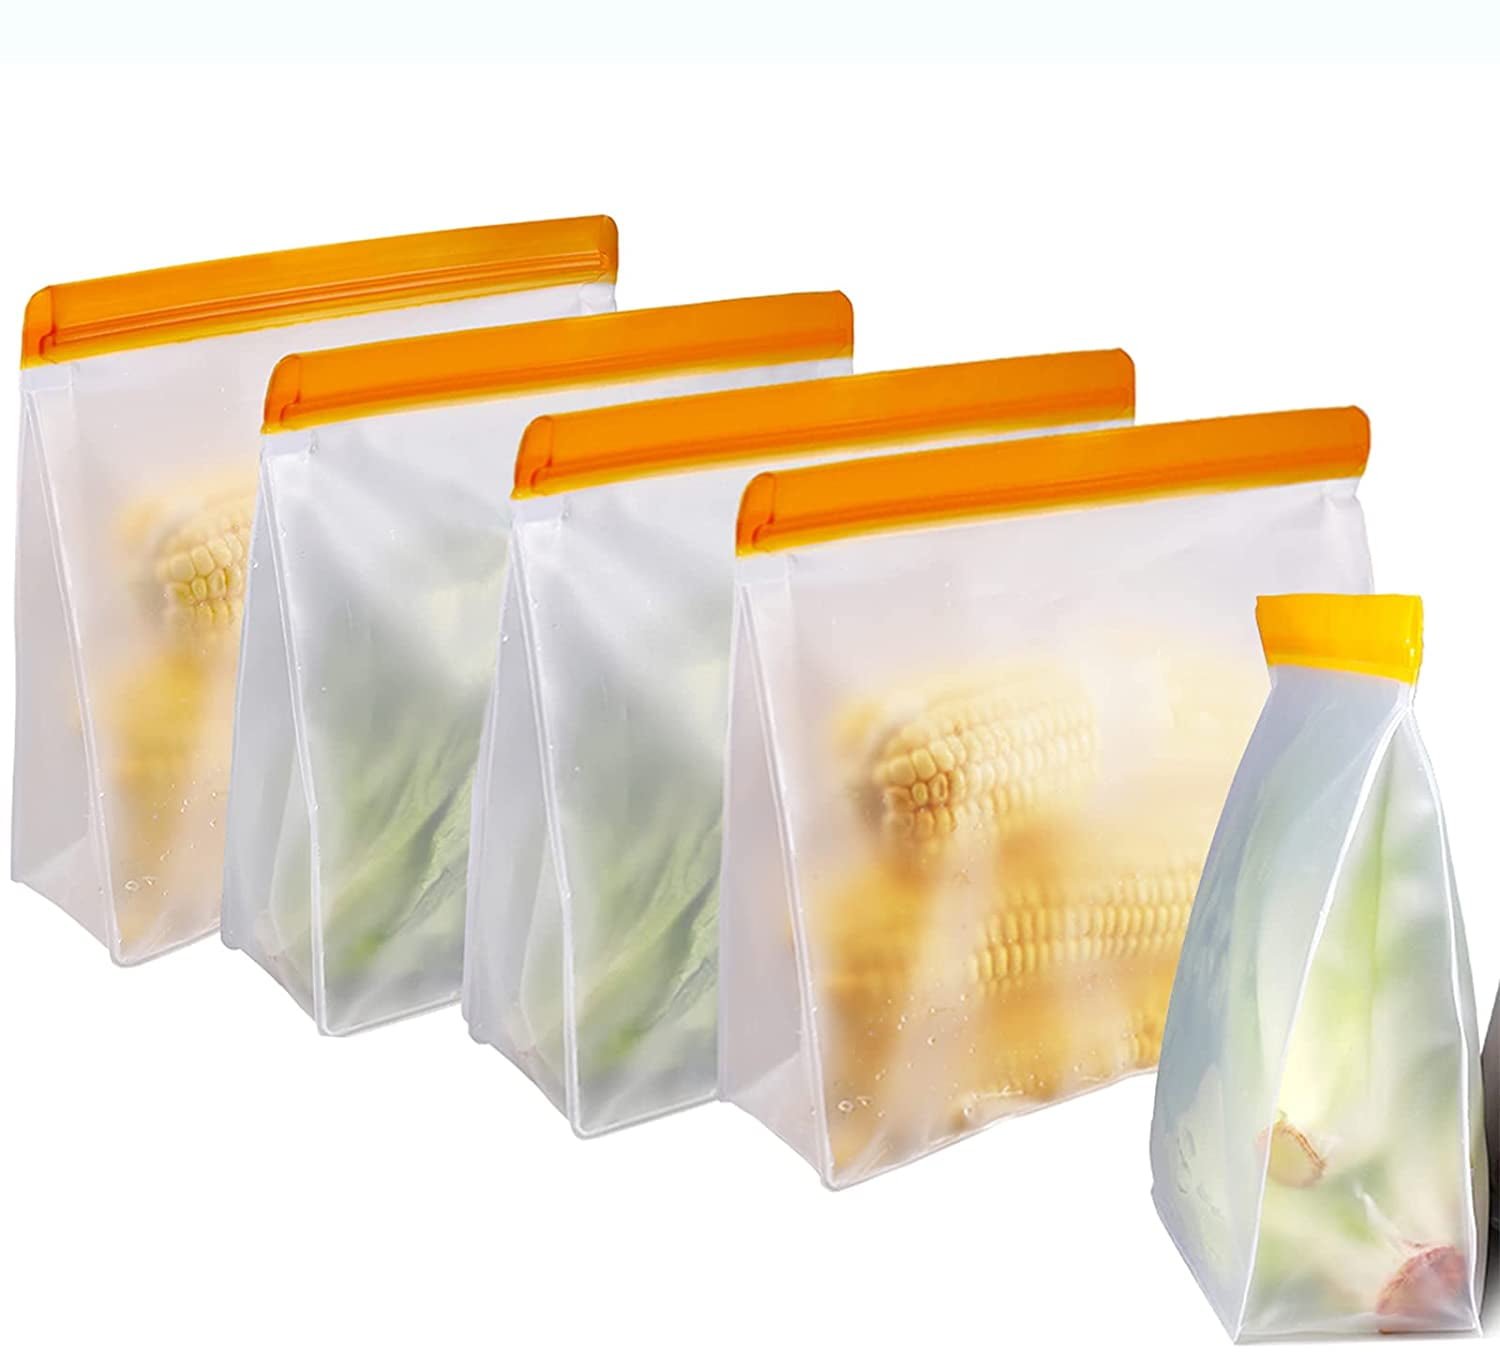 Reusable Gallon Bags - 5 Pack - Extra Thick Reusable Freezer Bags - BPA Free, Easy Seal & Leakproof Food Storage Bags for Marinate Food, Fruits